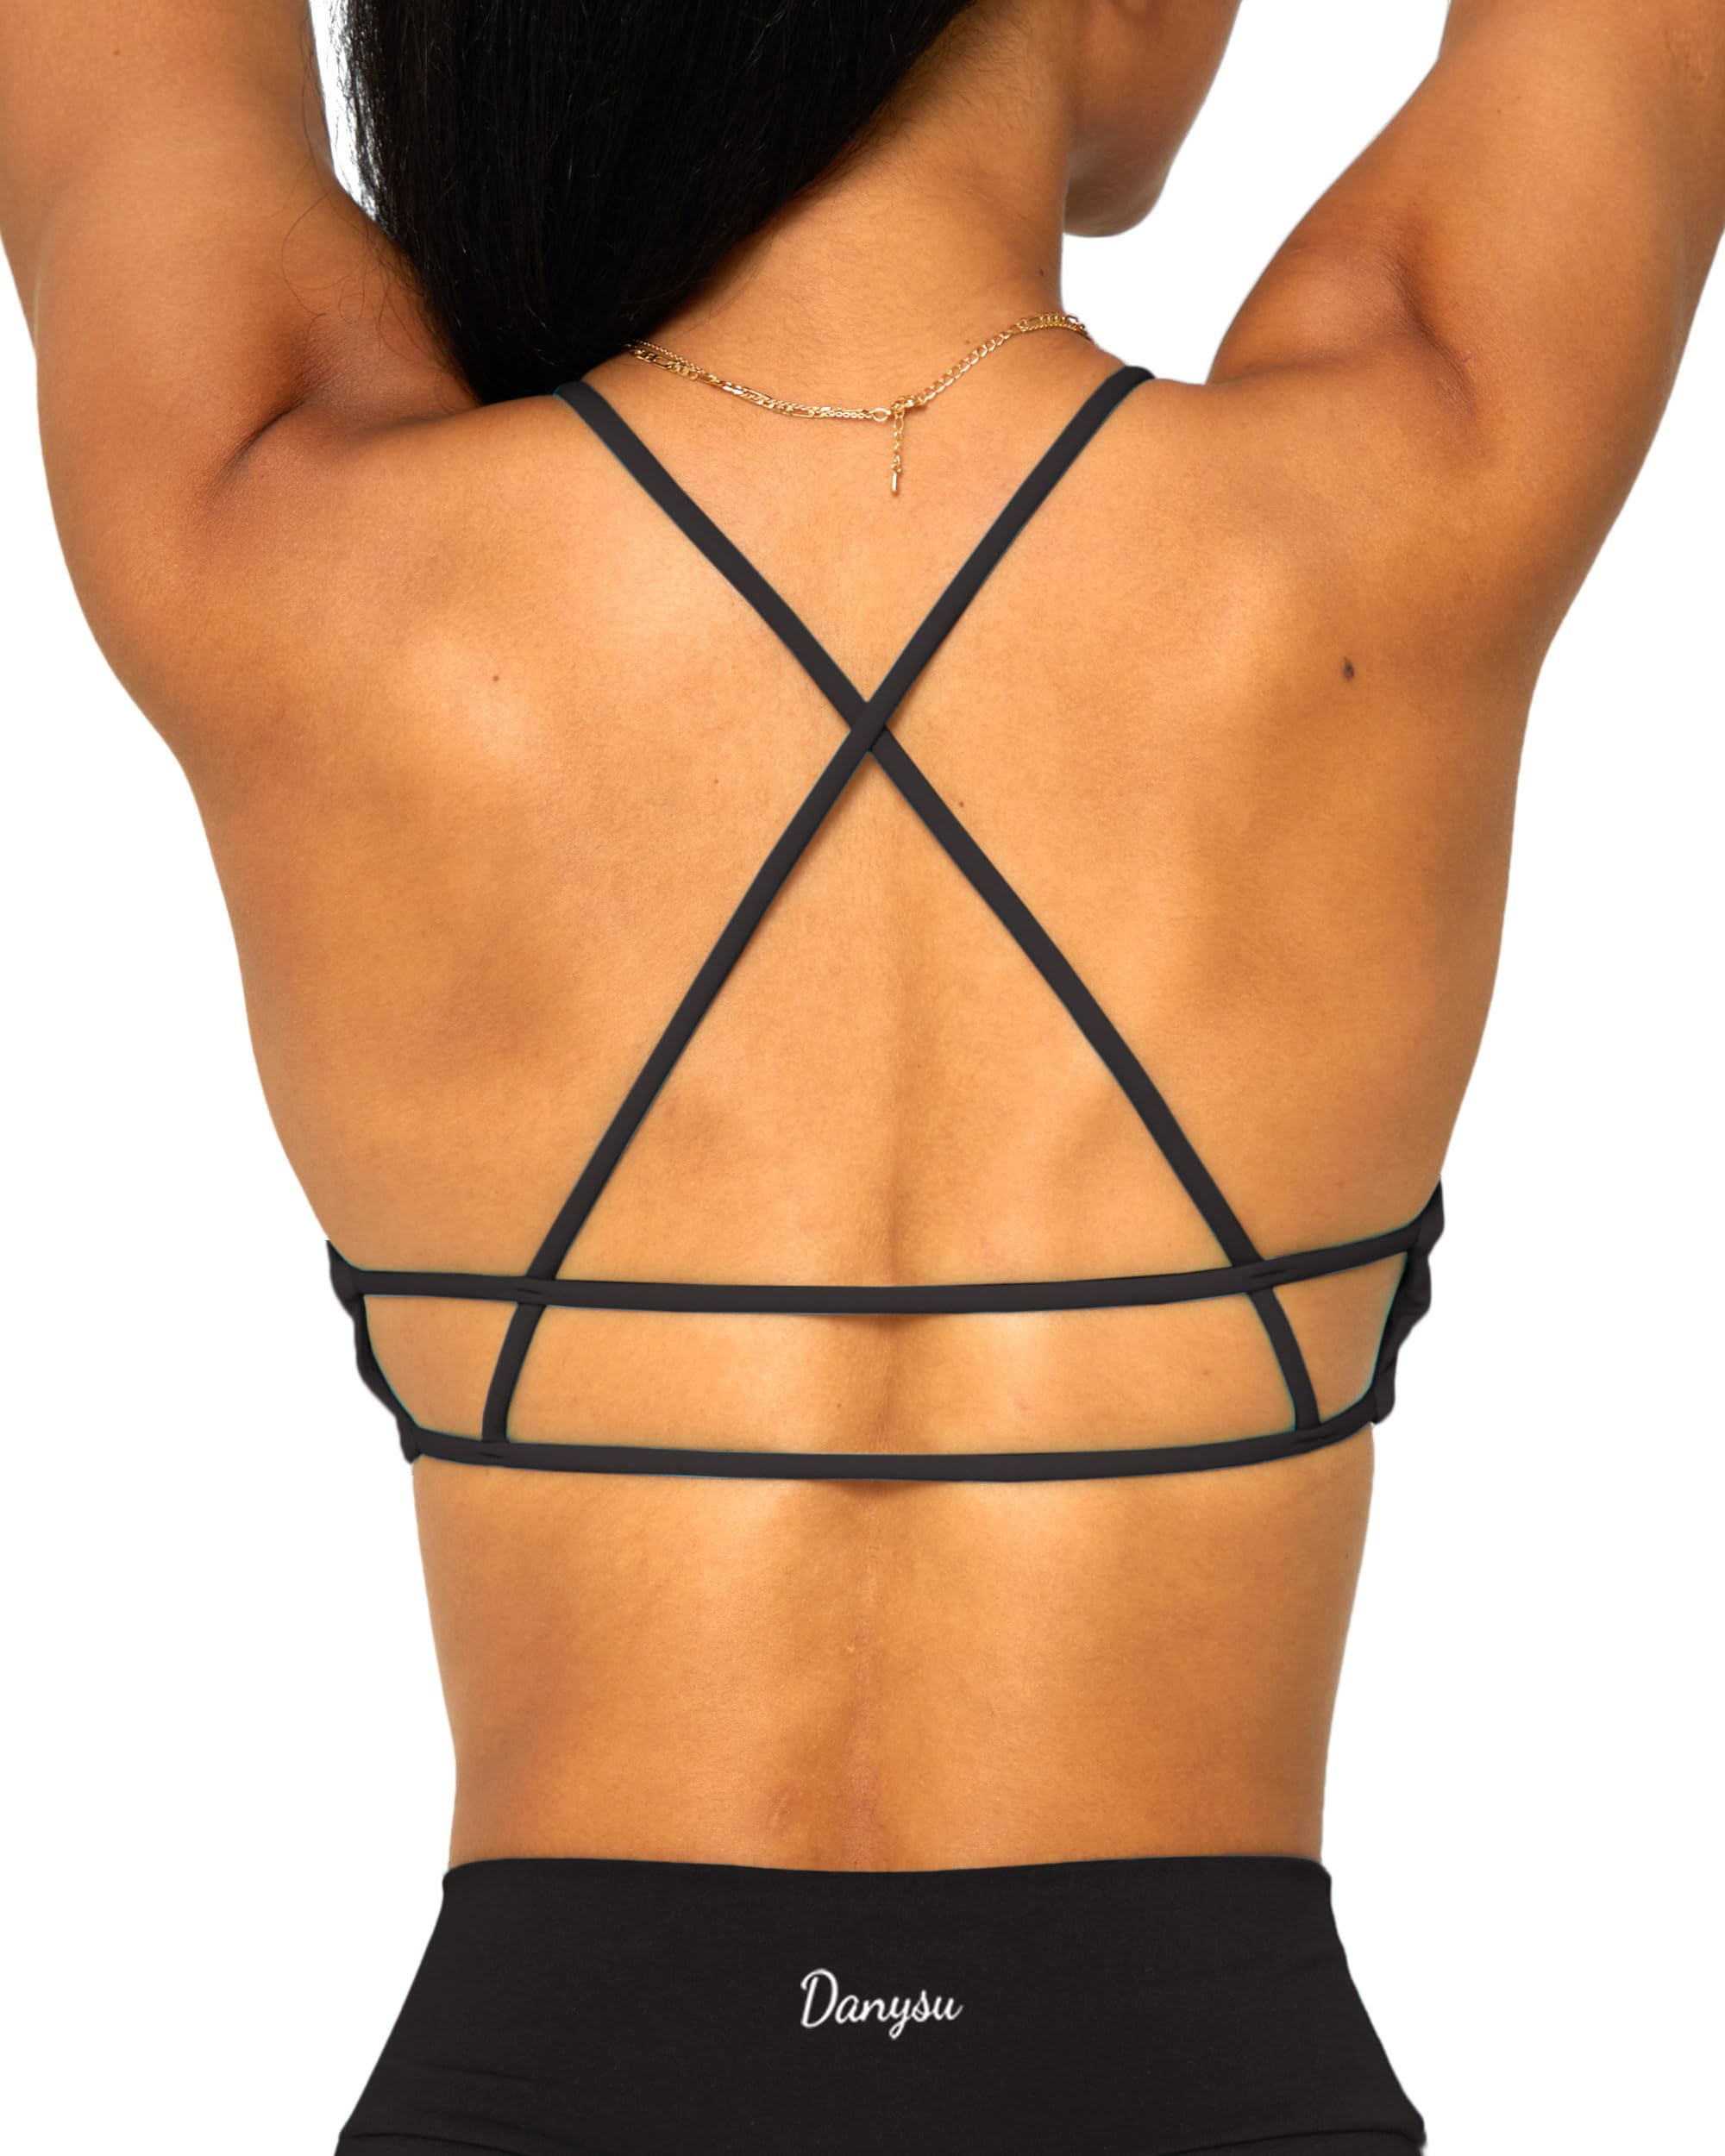 Backless sports bra and tops for the win anyway 😍😍 #danysu #backless